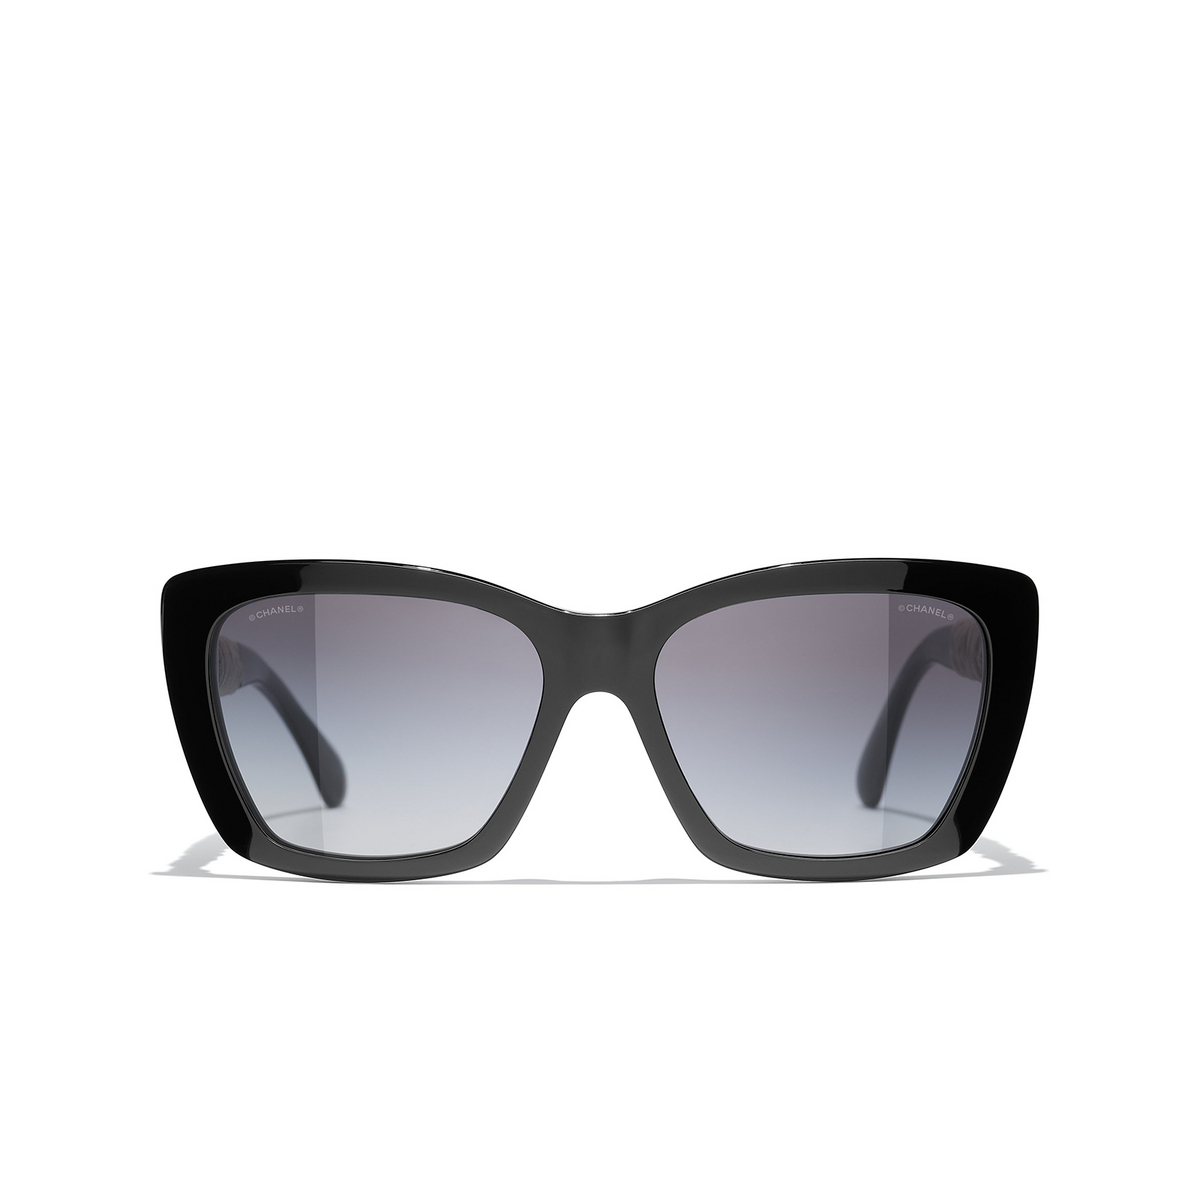 CHANEL butterfly Sunglasses 1082S6 Black & White - front view